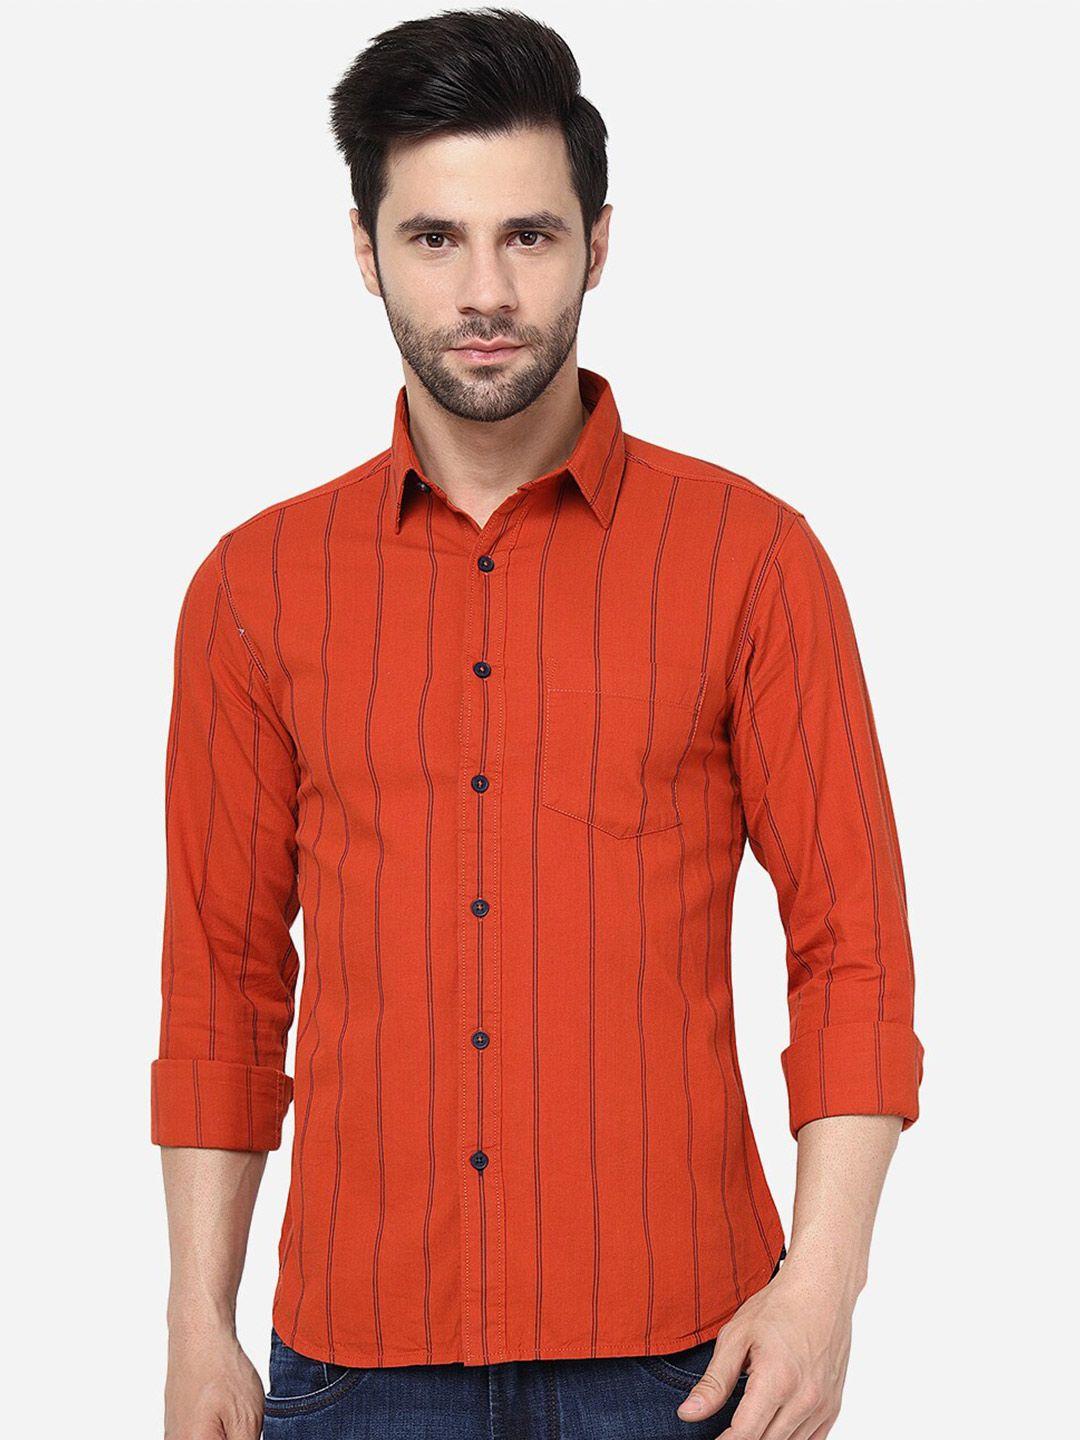 greenfibre slim fit vertical striped knitted pure cotton casual shirt